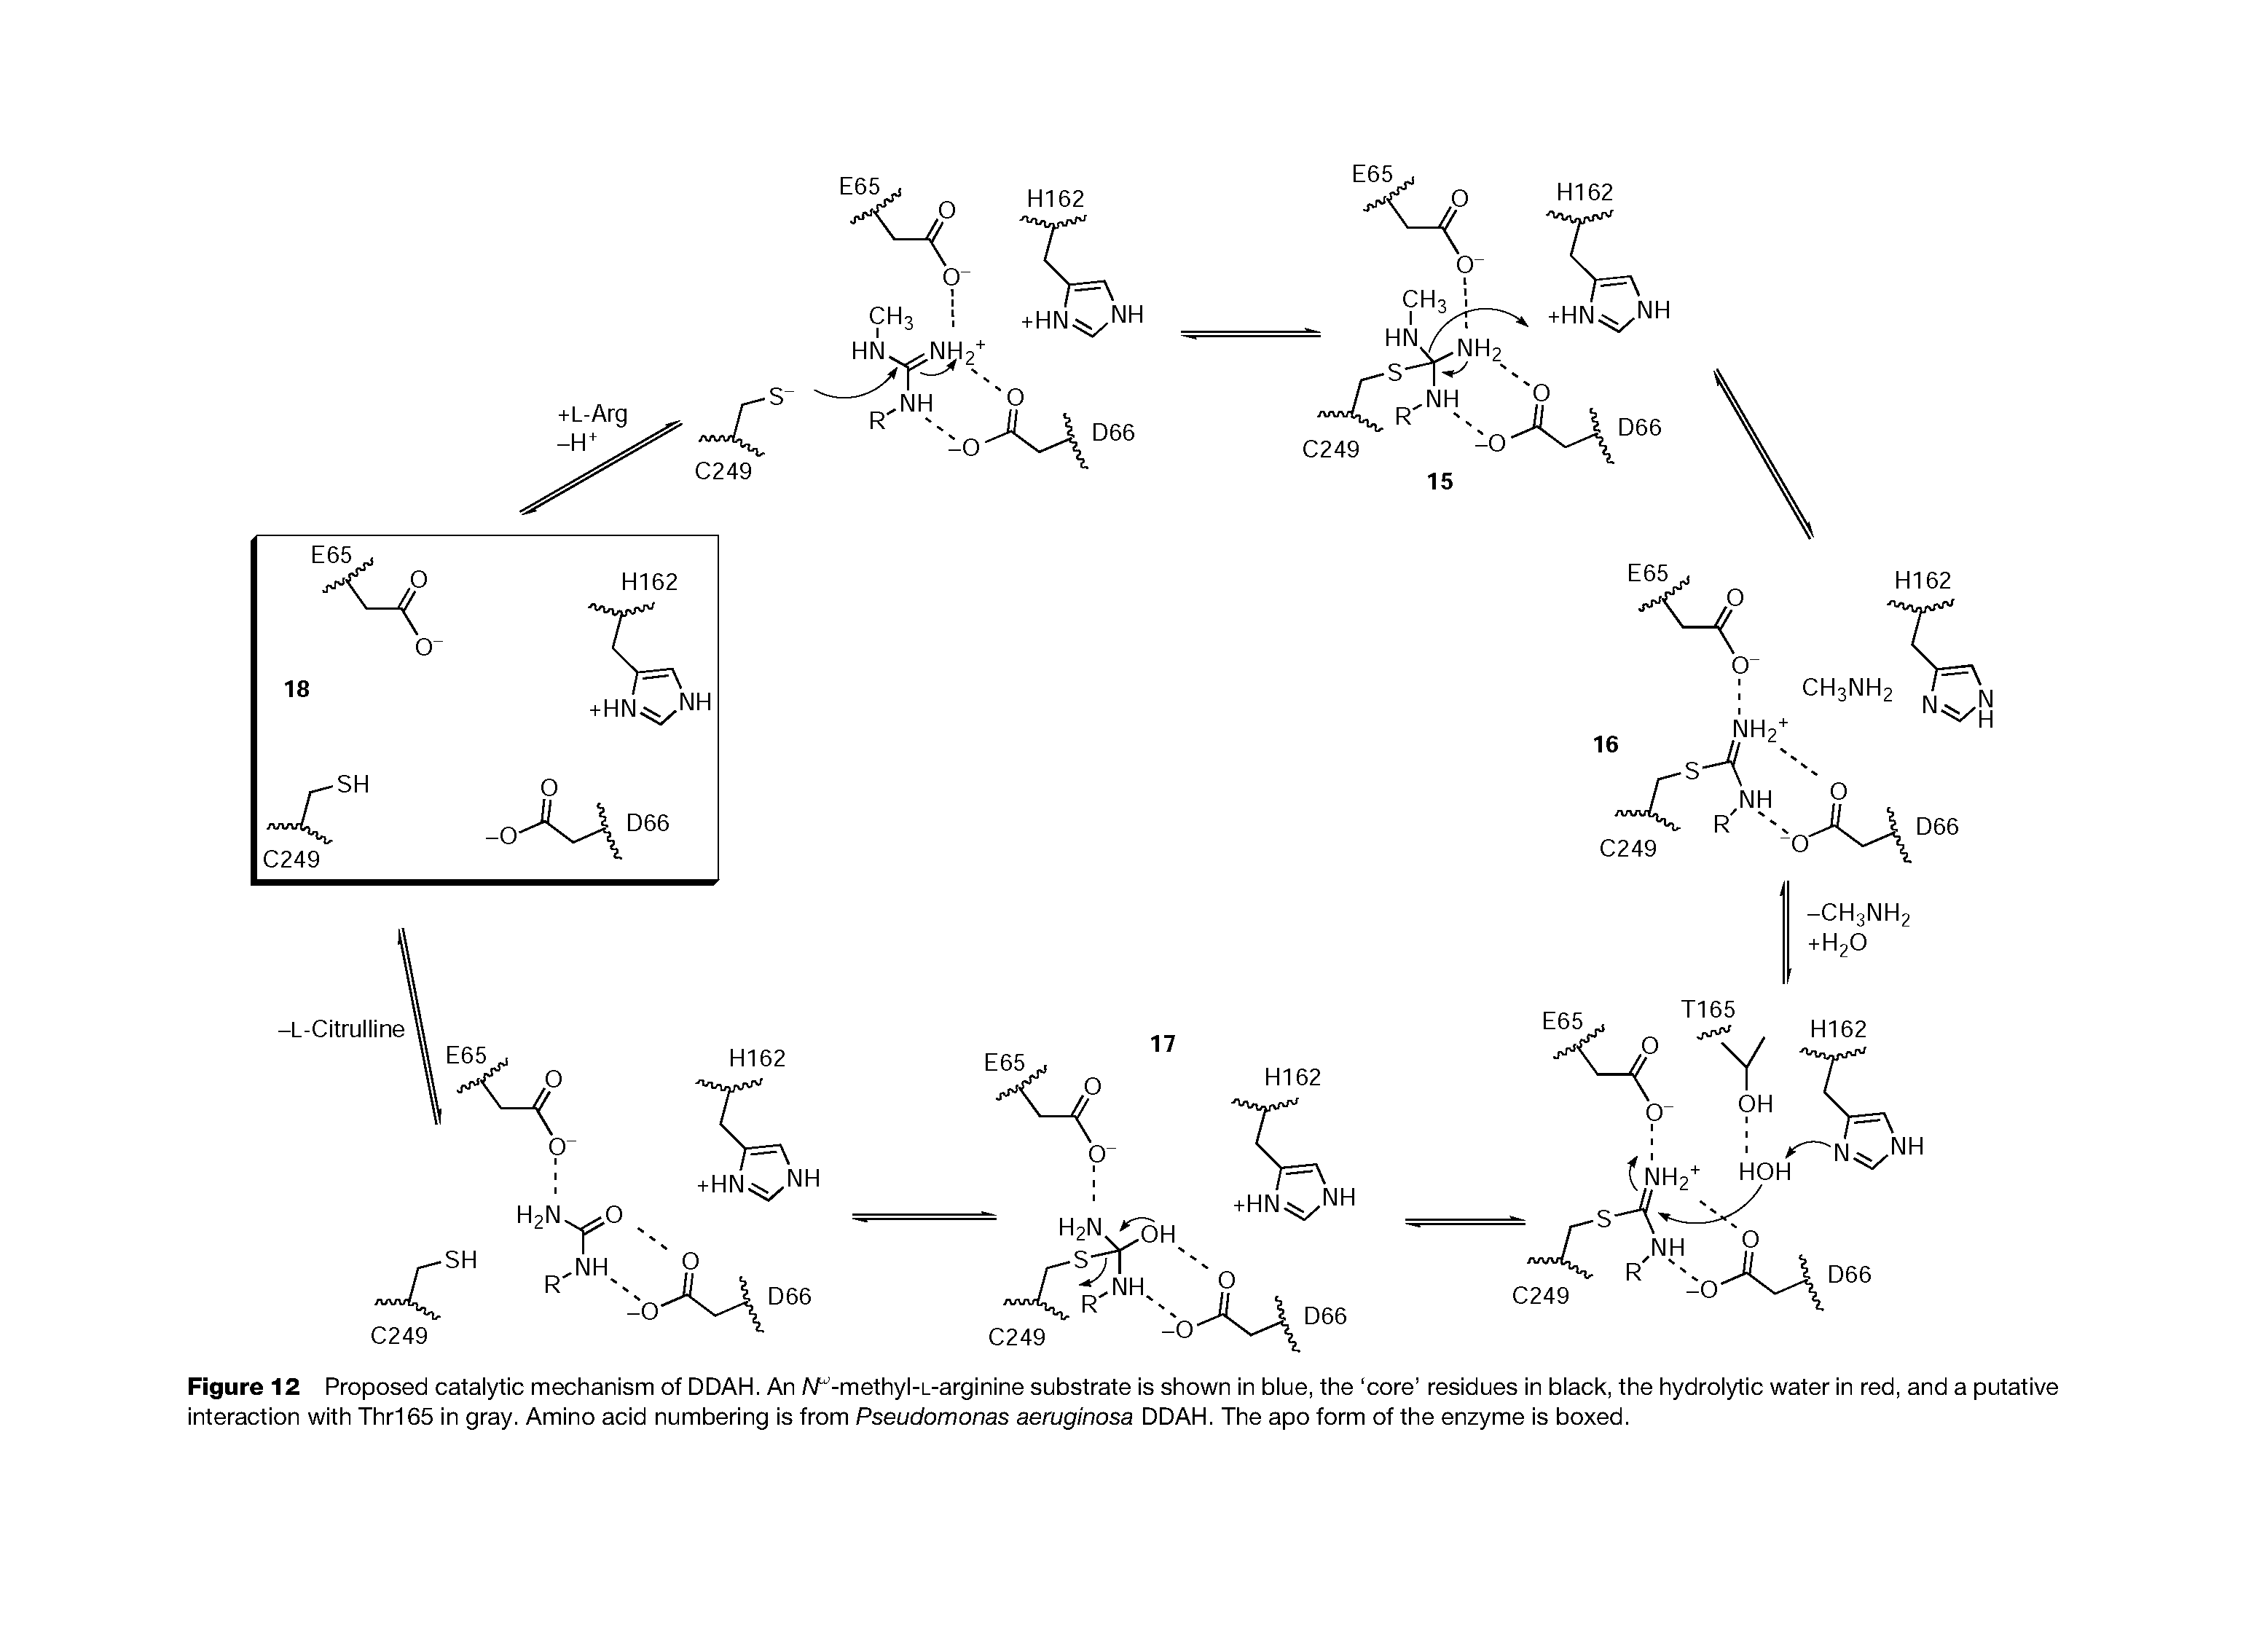 Figure 12 Proposed catalytic mechanism of DDAH. An W -methyl-L-arginine substrate is shown in blue, the core residues in black, the hydrolytic water in red, and a putative interaction with Thr165 in gray. Amino acid numbering is from Pseudomonas aeruginosa DDAH. The apo form of the enzyme is boxed.